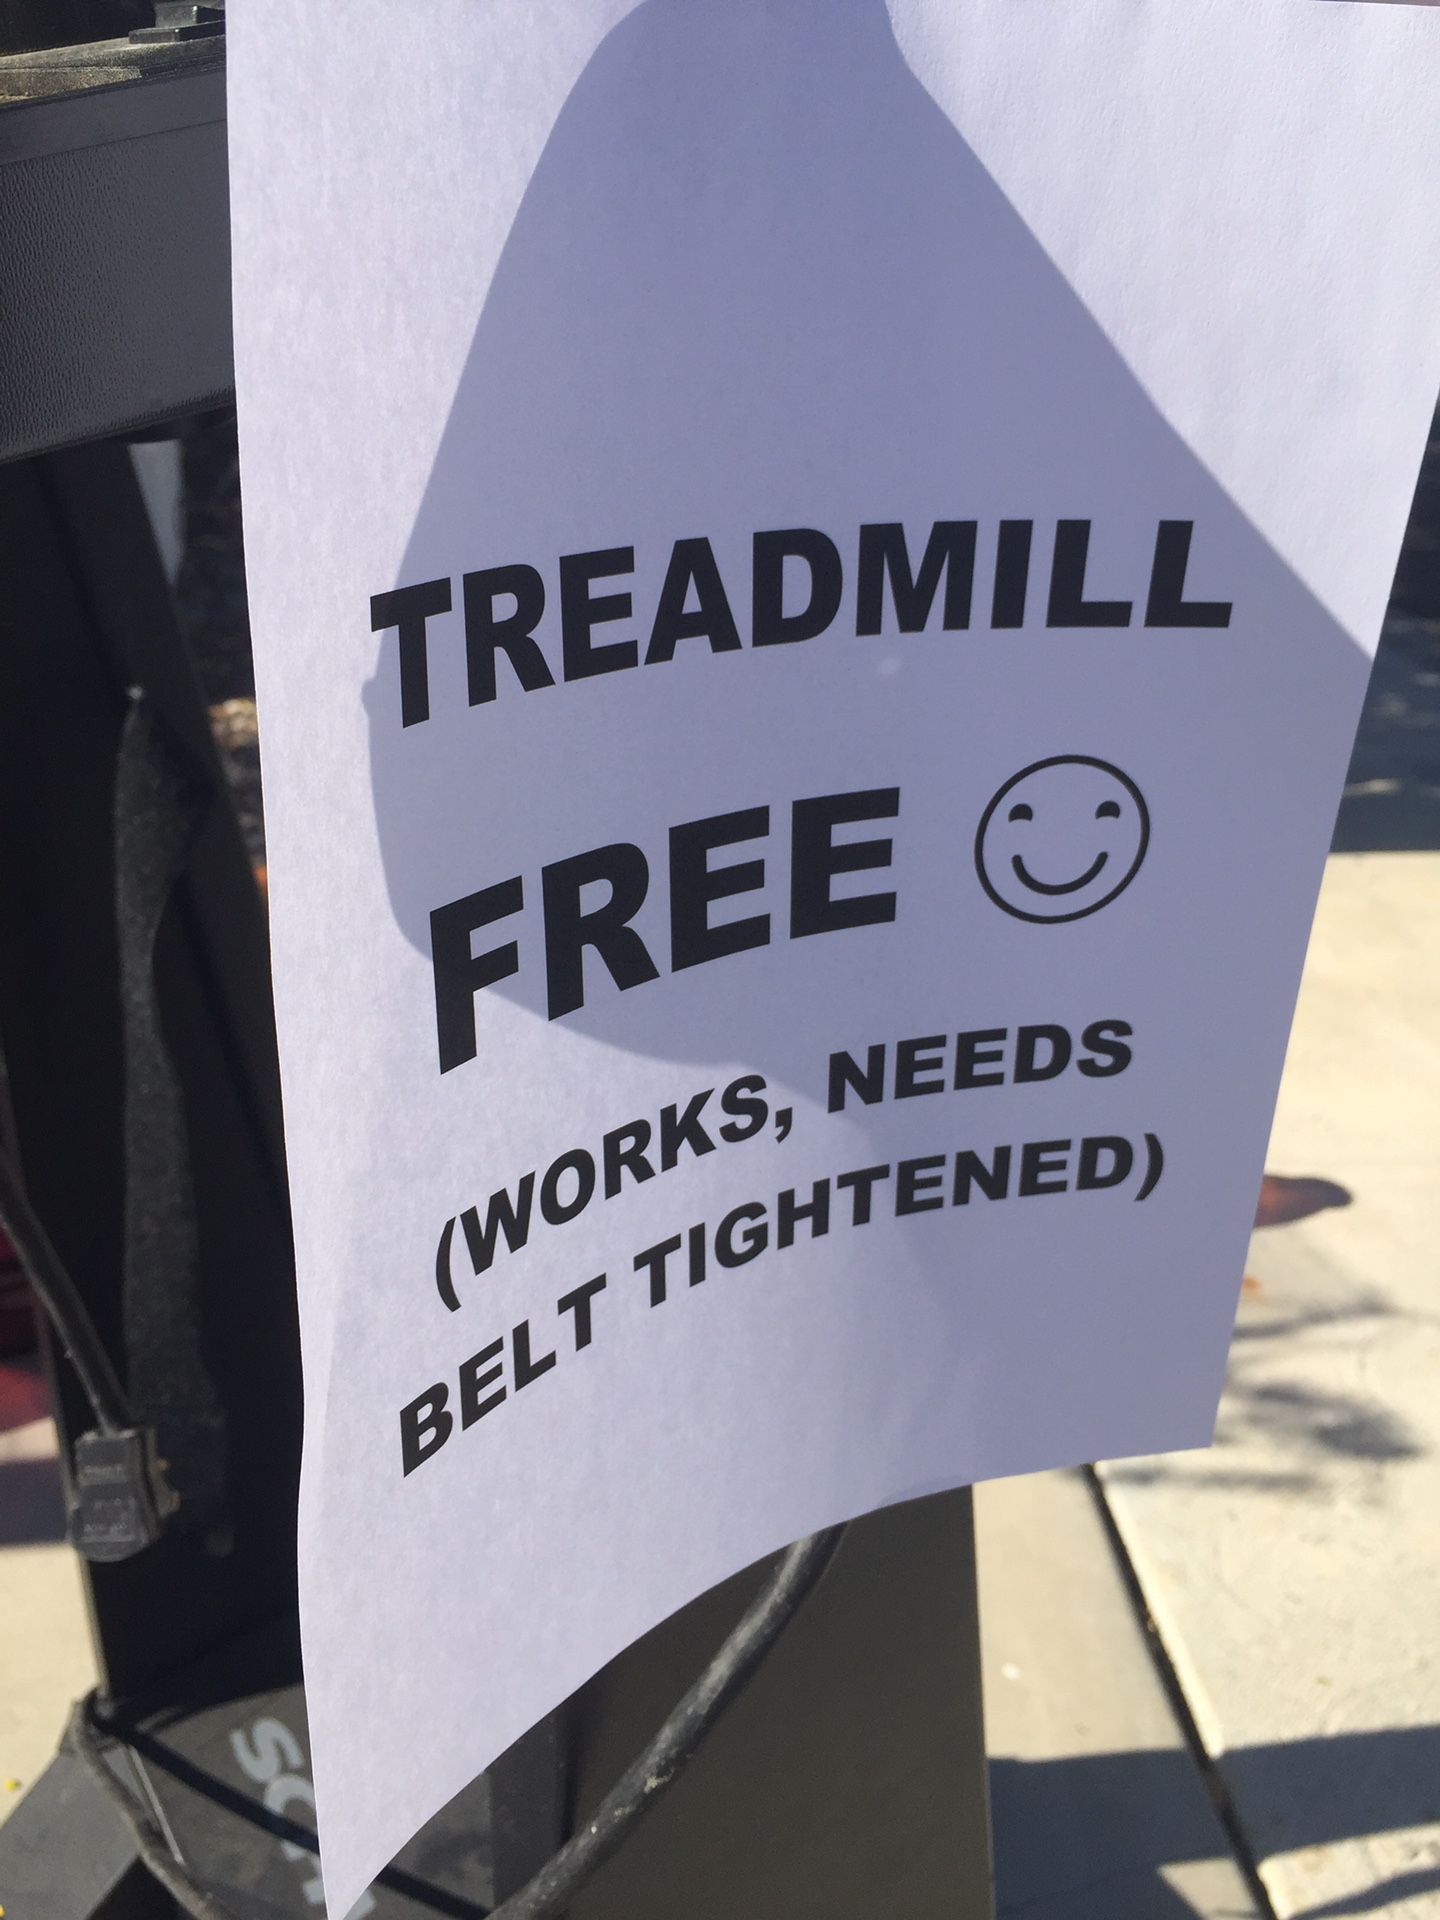 FREE WORKING TREADMILL-Come get it today!